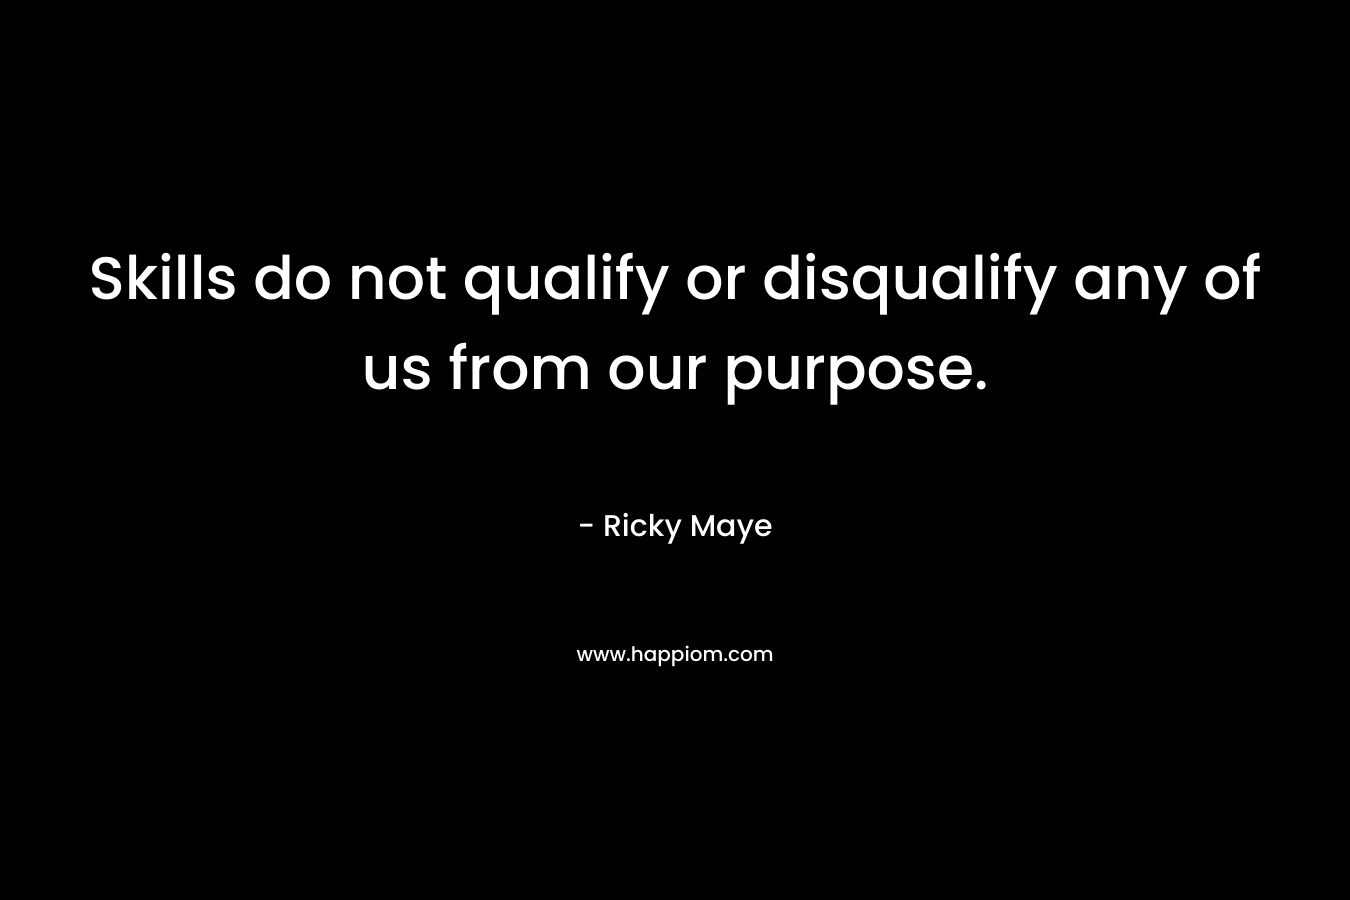 Skills do not qualify or disqualify any of us from our purpose. – Ricky Maye